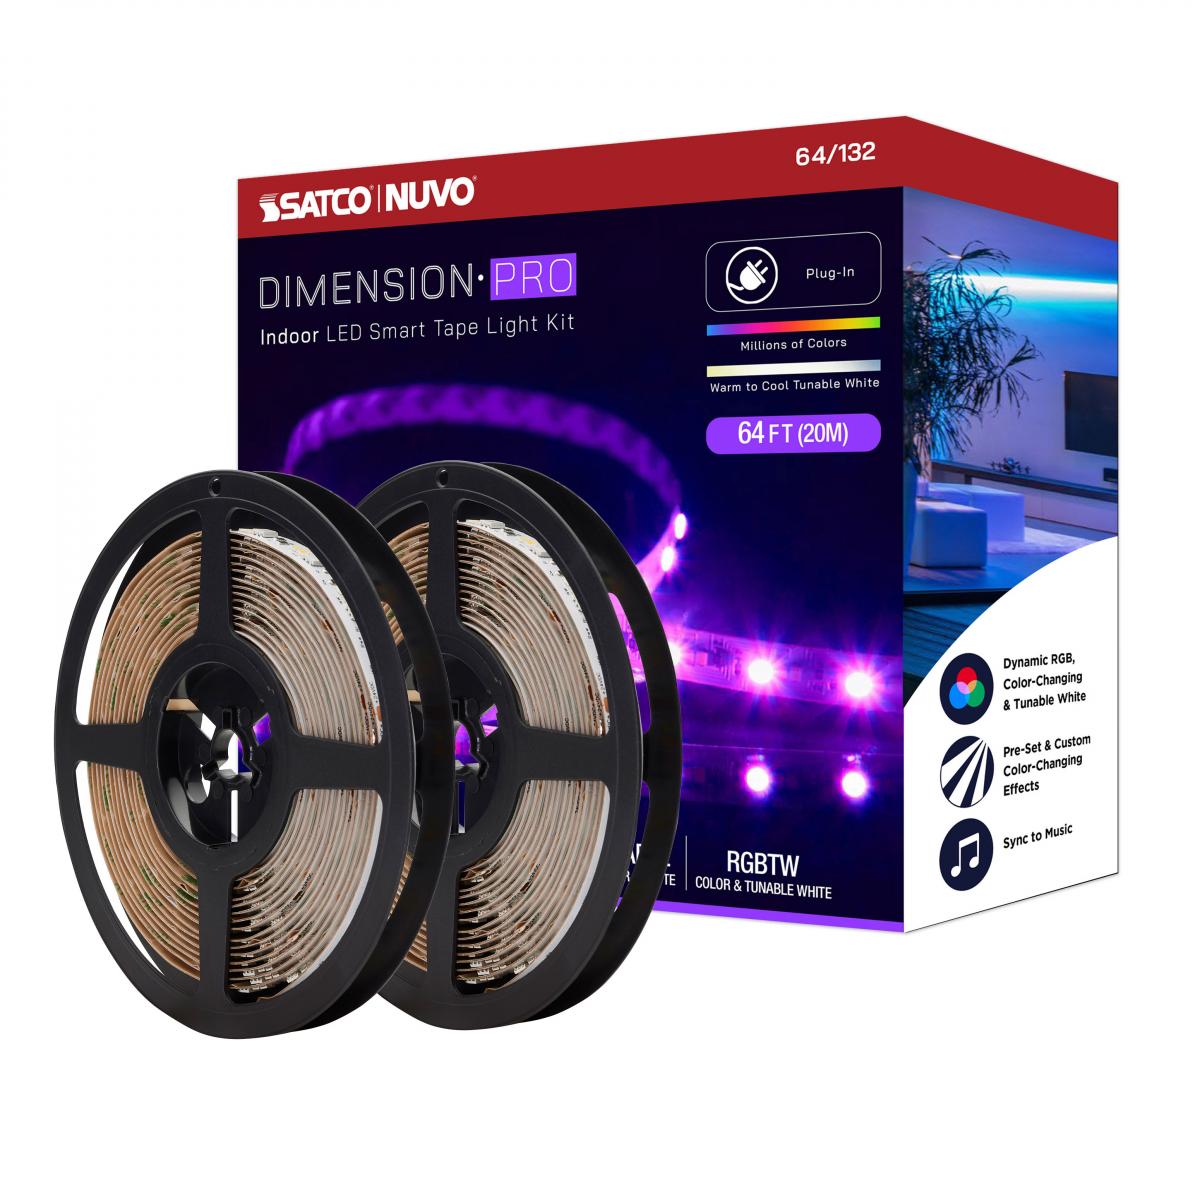 Dimension Pro, Tape Light Strip; 64 ft, Hi-Output, RGB plus Tunable White, Plug connection, Starfish IOT Capable, IR Remote Included